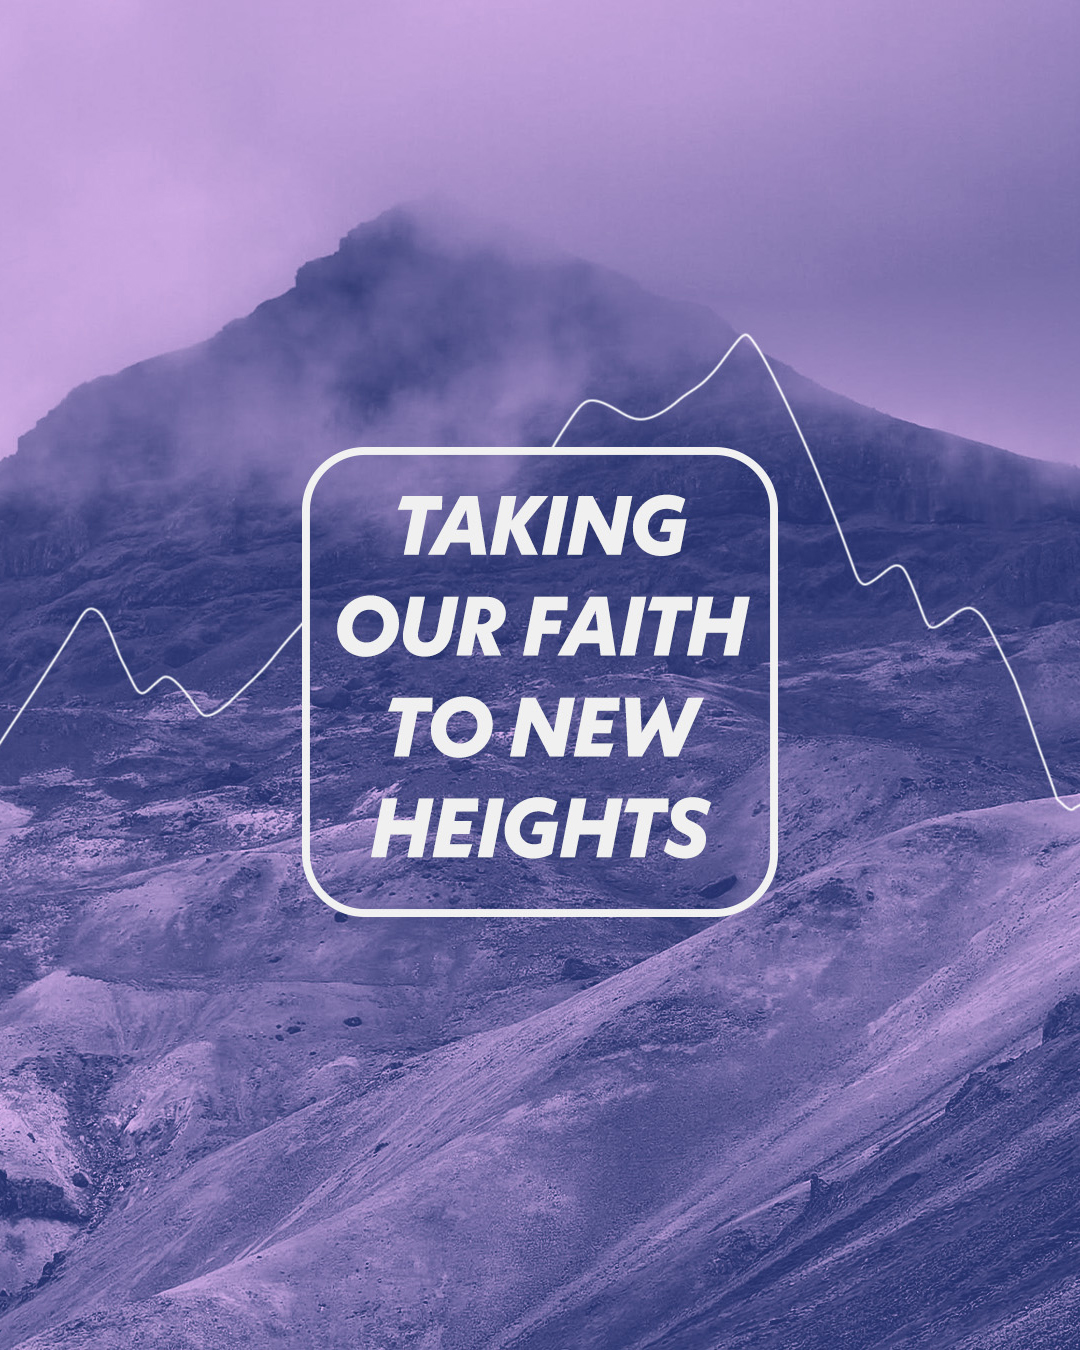 Taking our faith to new heights